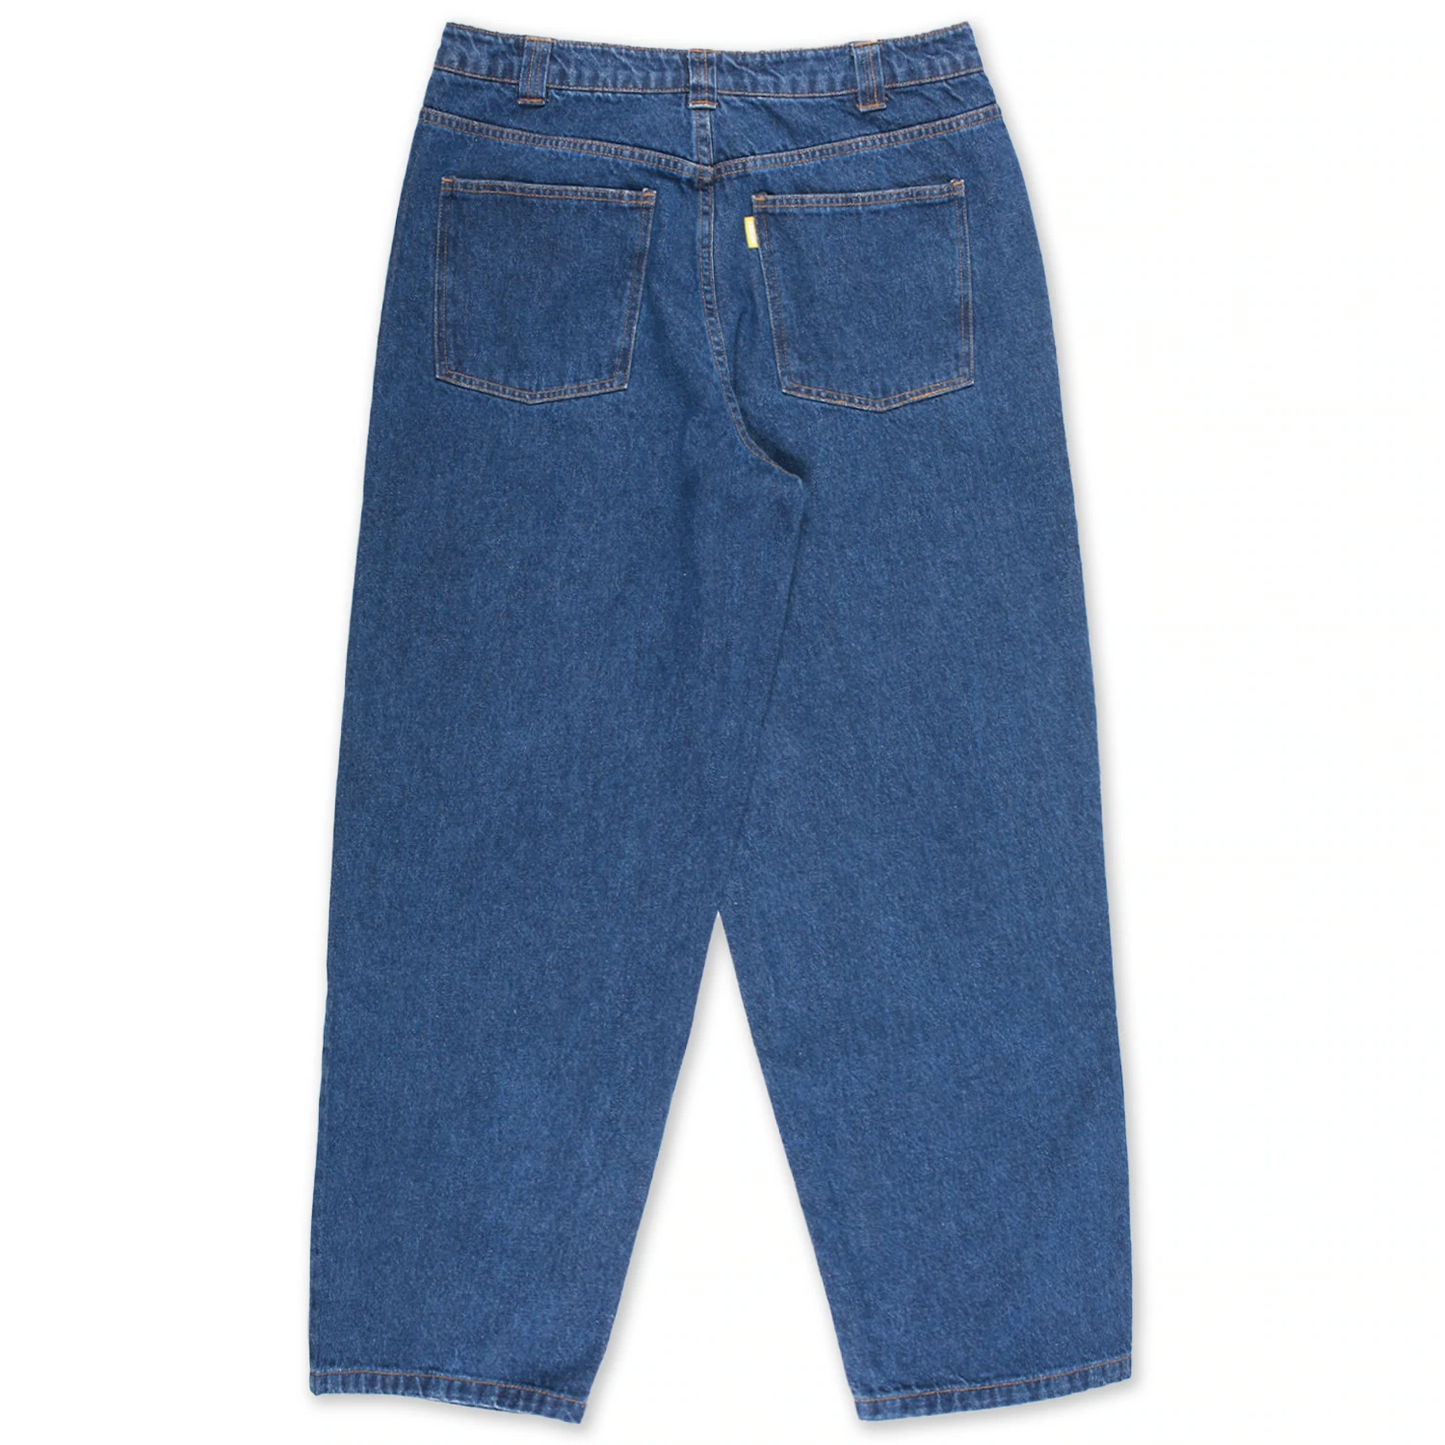 THEORIES PLAZA JEANS WASHED BLUE